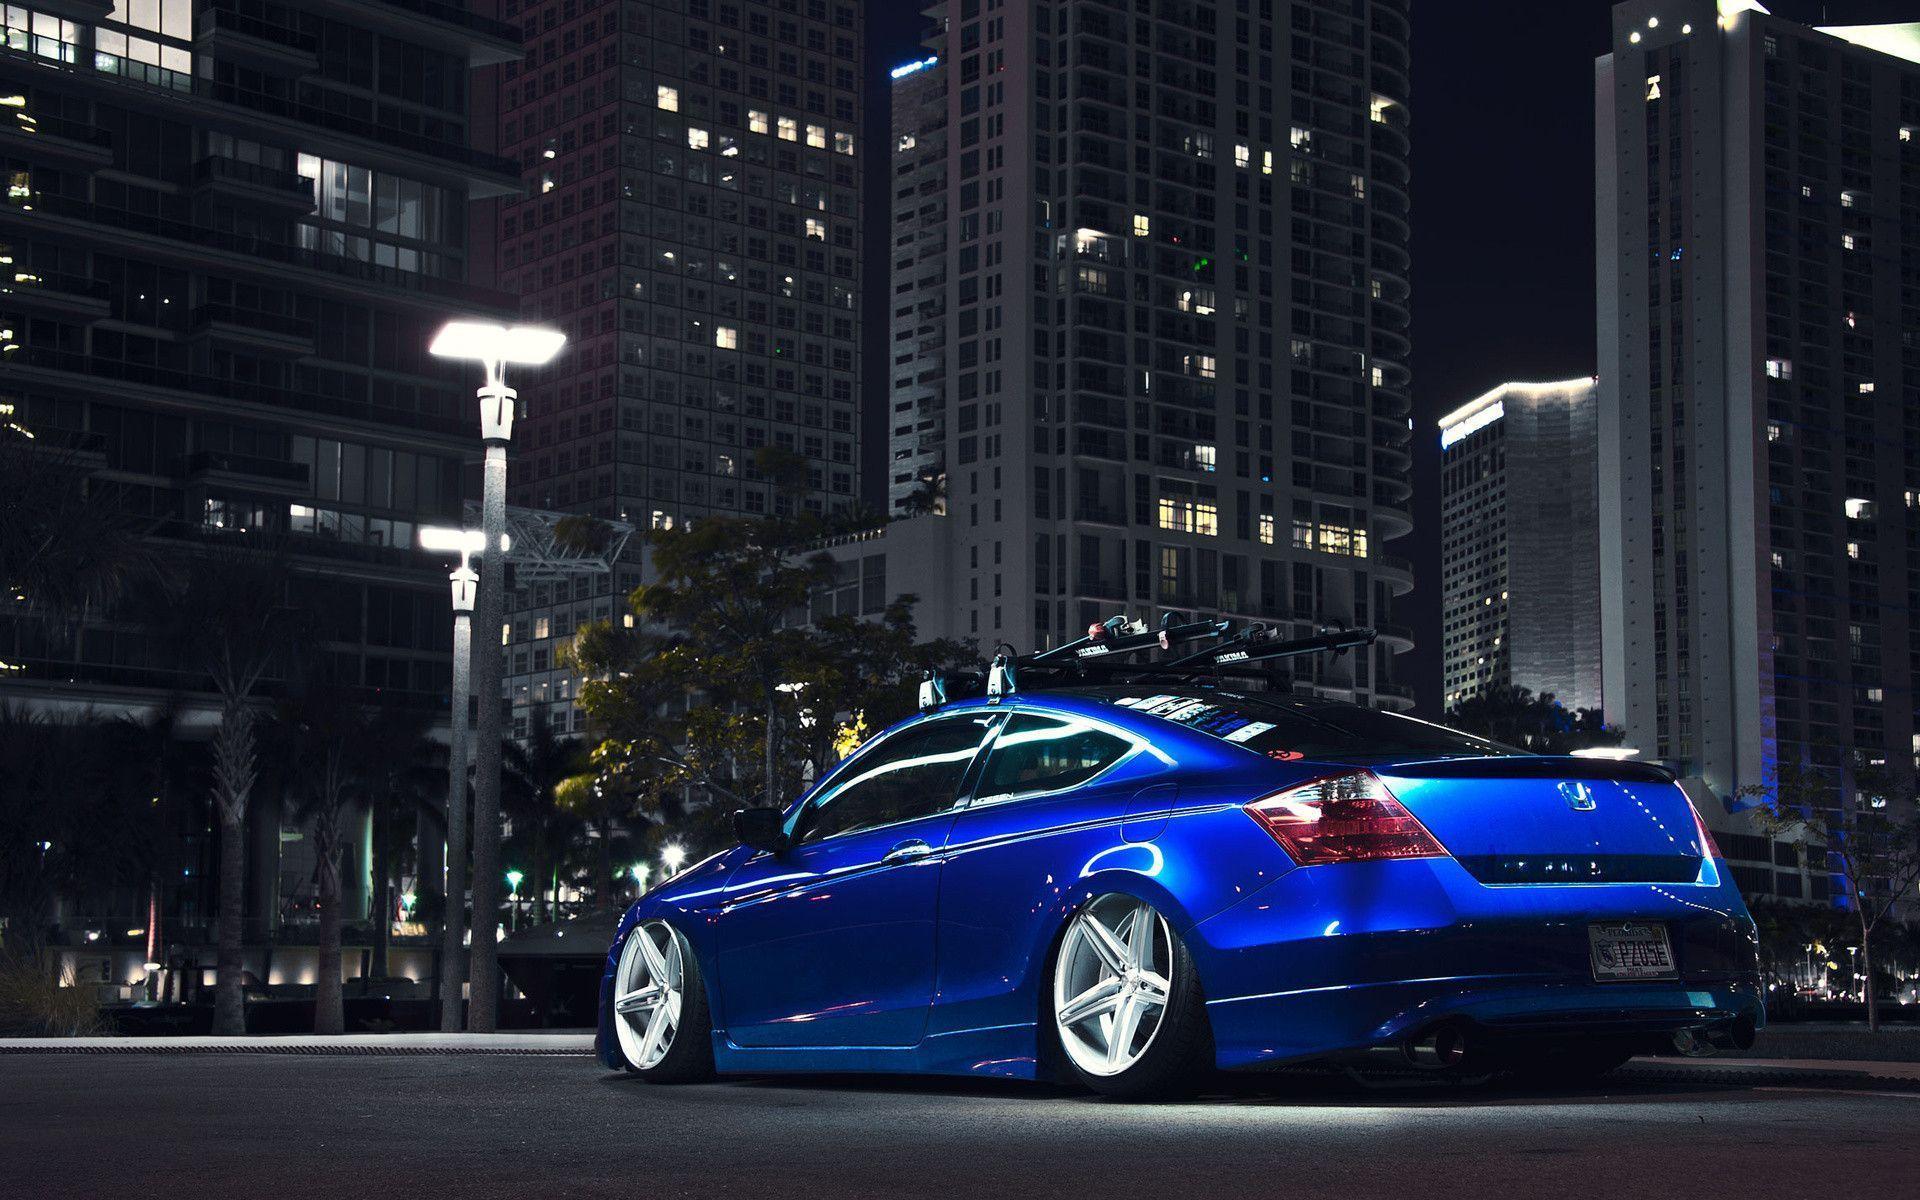 STANCE. Accord Coupe, Honda